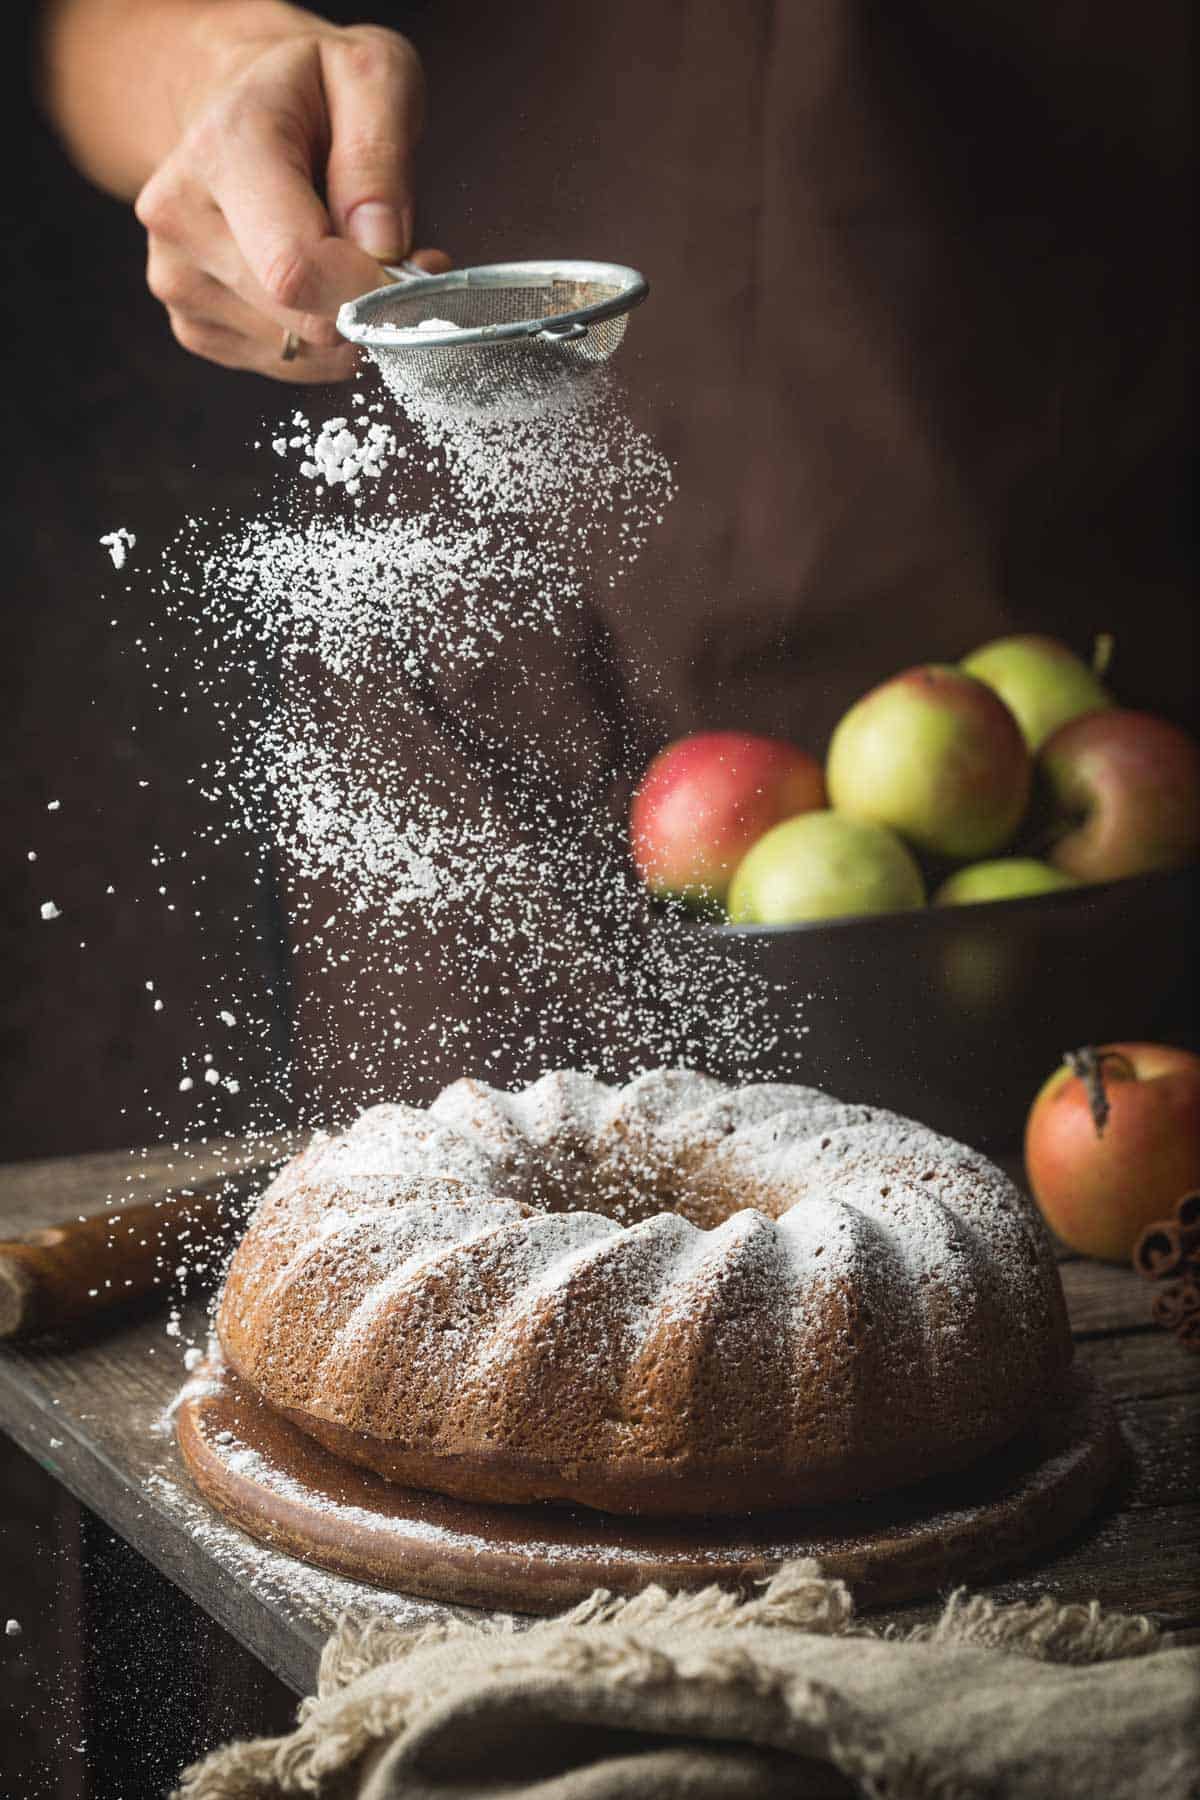 Dusting powdered sugar on a Bundt cake with a box of apples in the background.